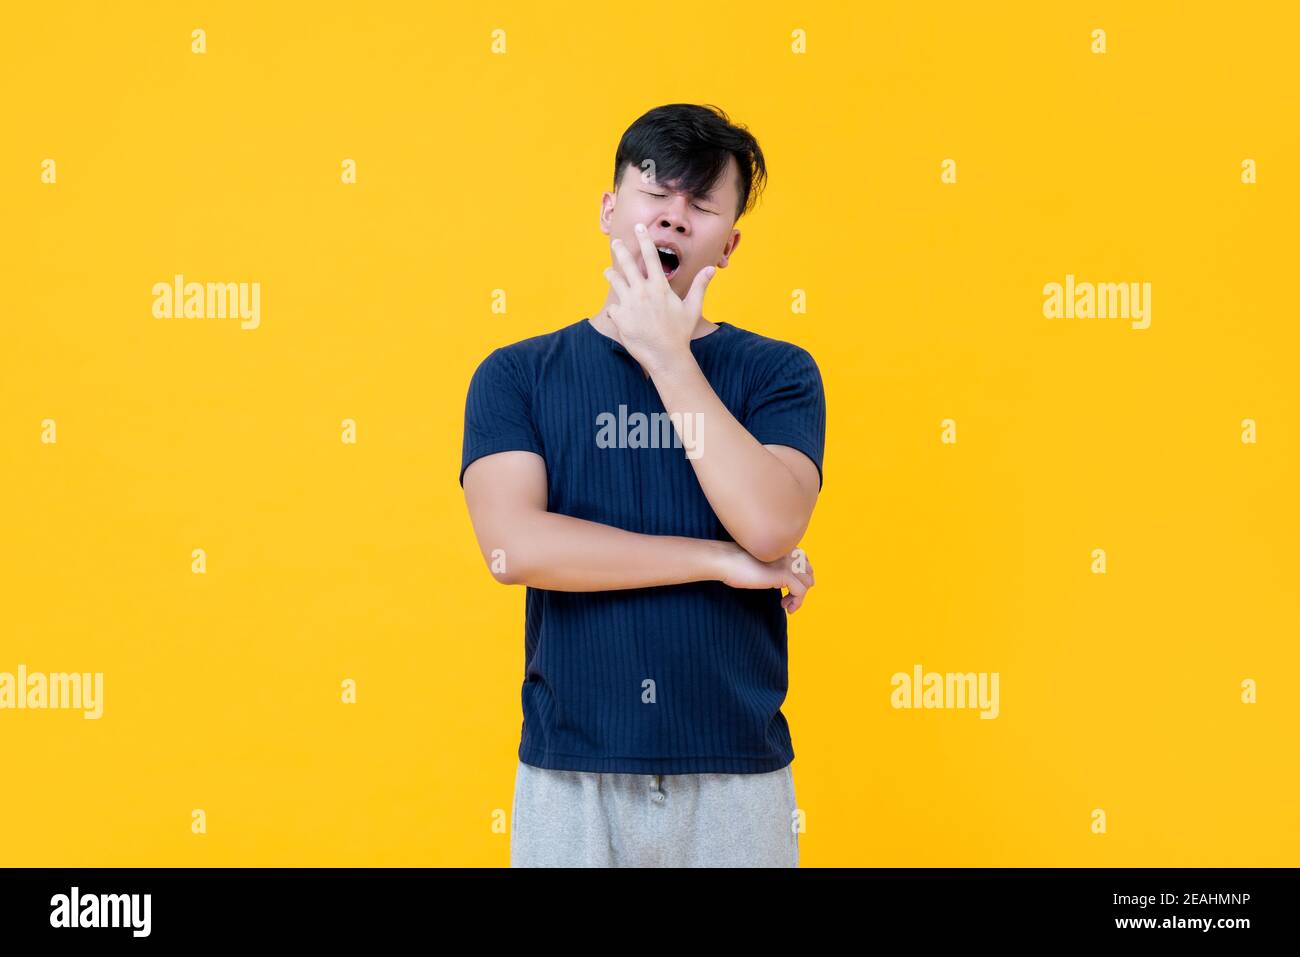 Tired sleepy Asian man yawning with hand covering mouth suffering from insomnia Stock Photo